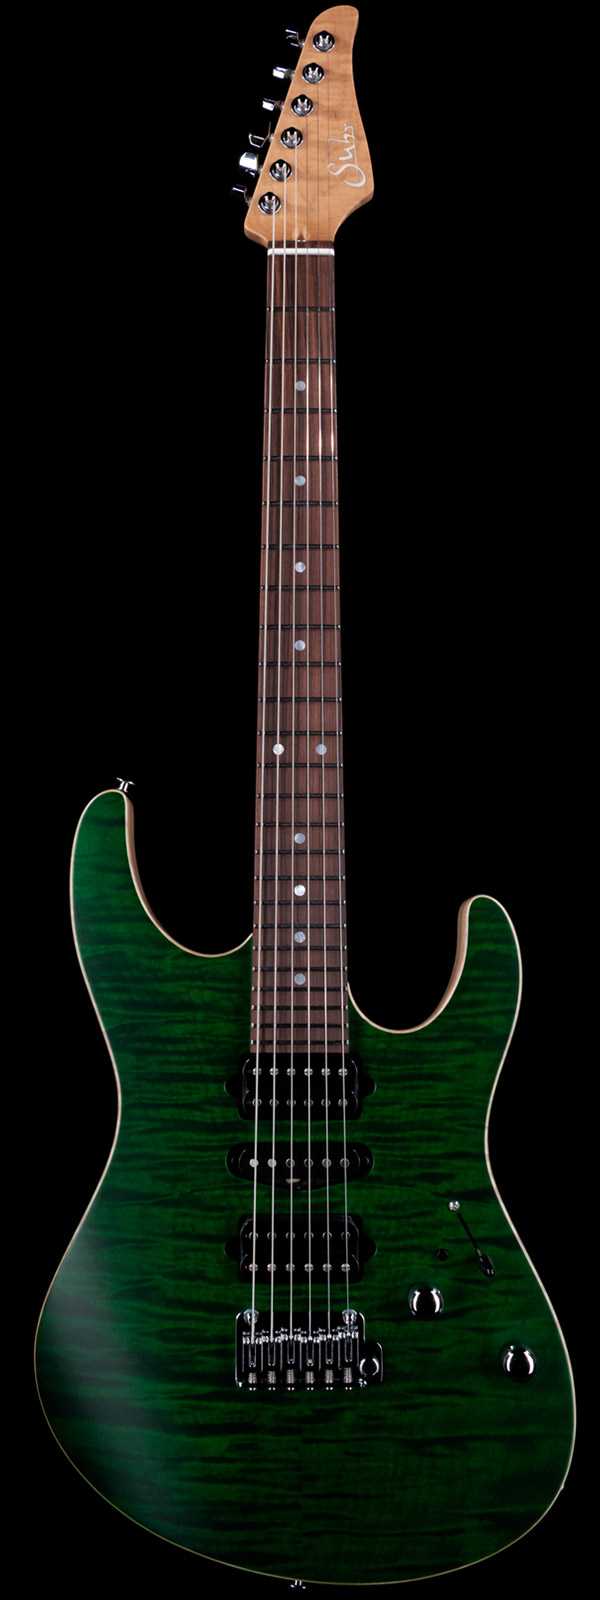 Suhr Modern Quilt Top Roasted Flame Maple Neck Trans Green Satin